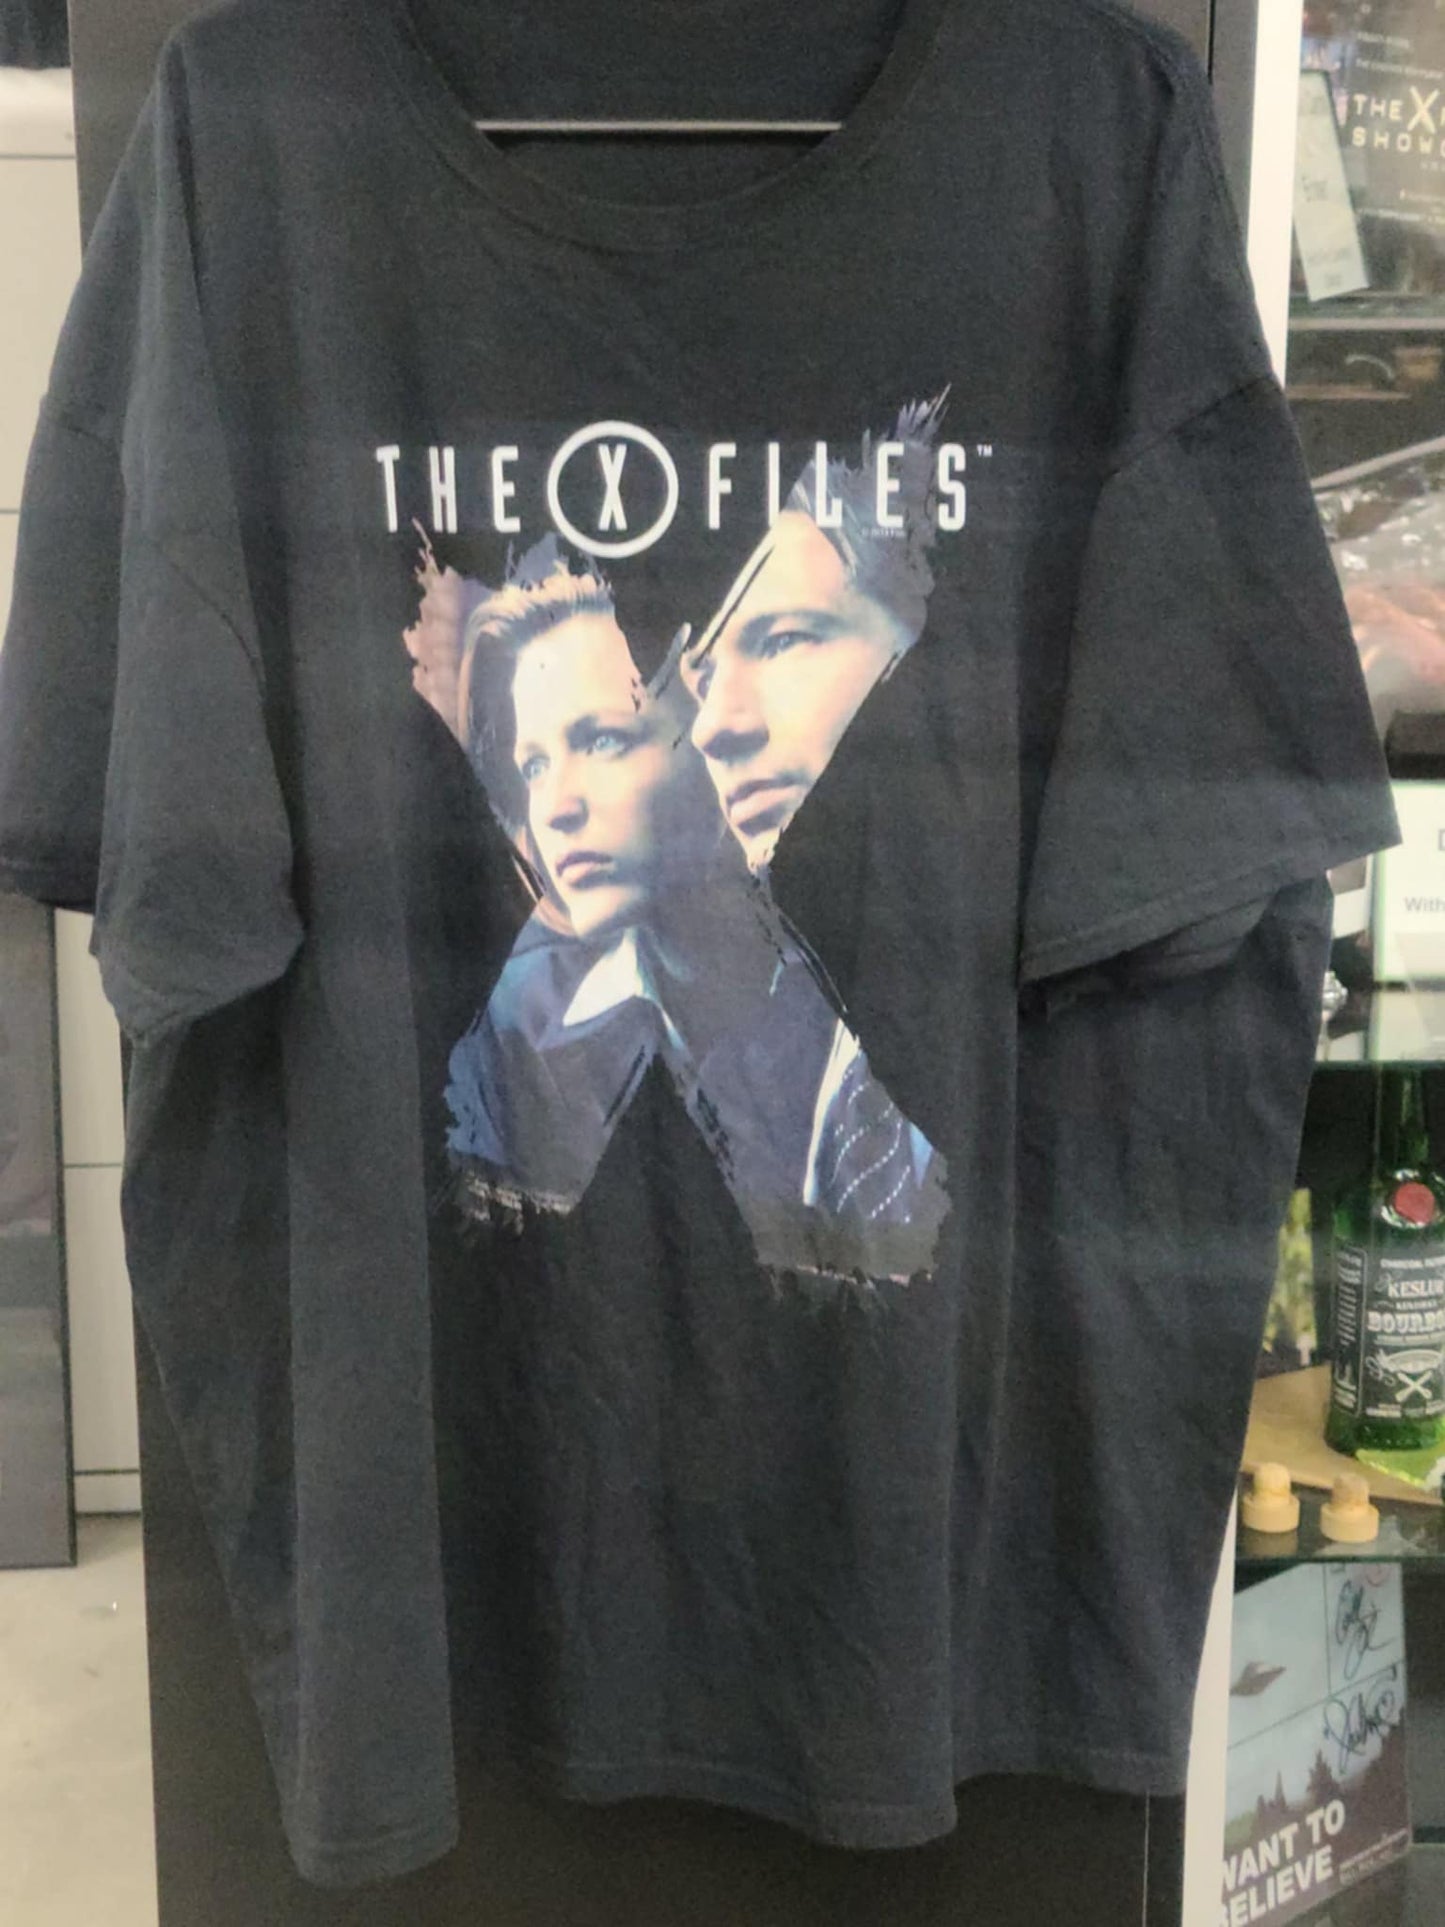 X-Files T-Shirt- Mulder and Scully